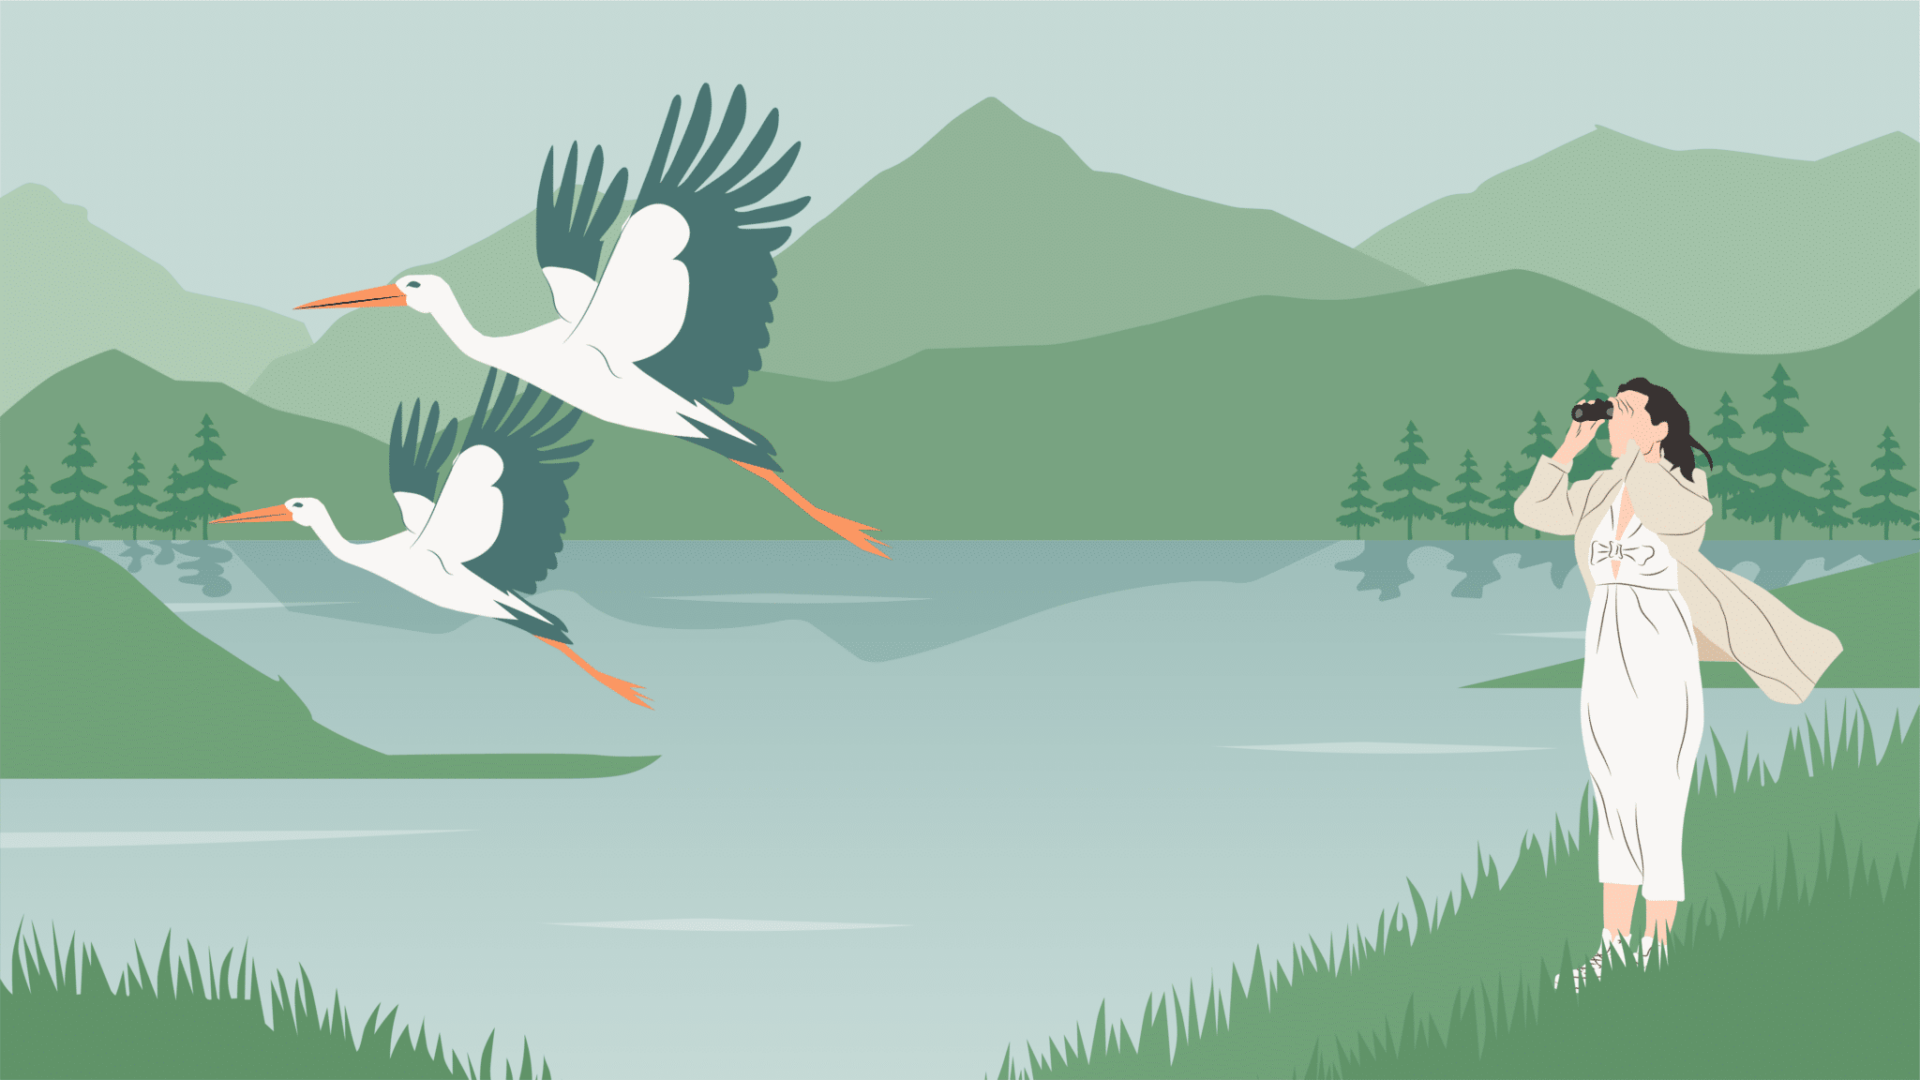 Illustration of two birds flying over a lake in mountains, birdwatcher watching with binoculars.